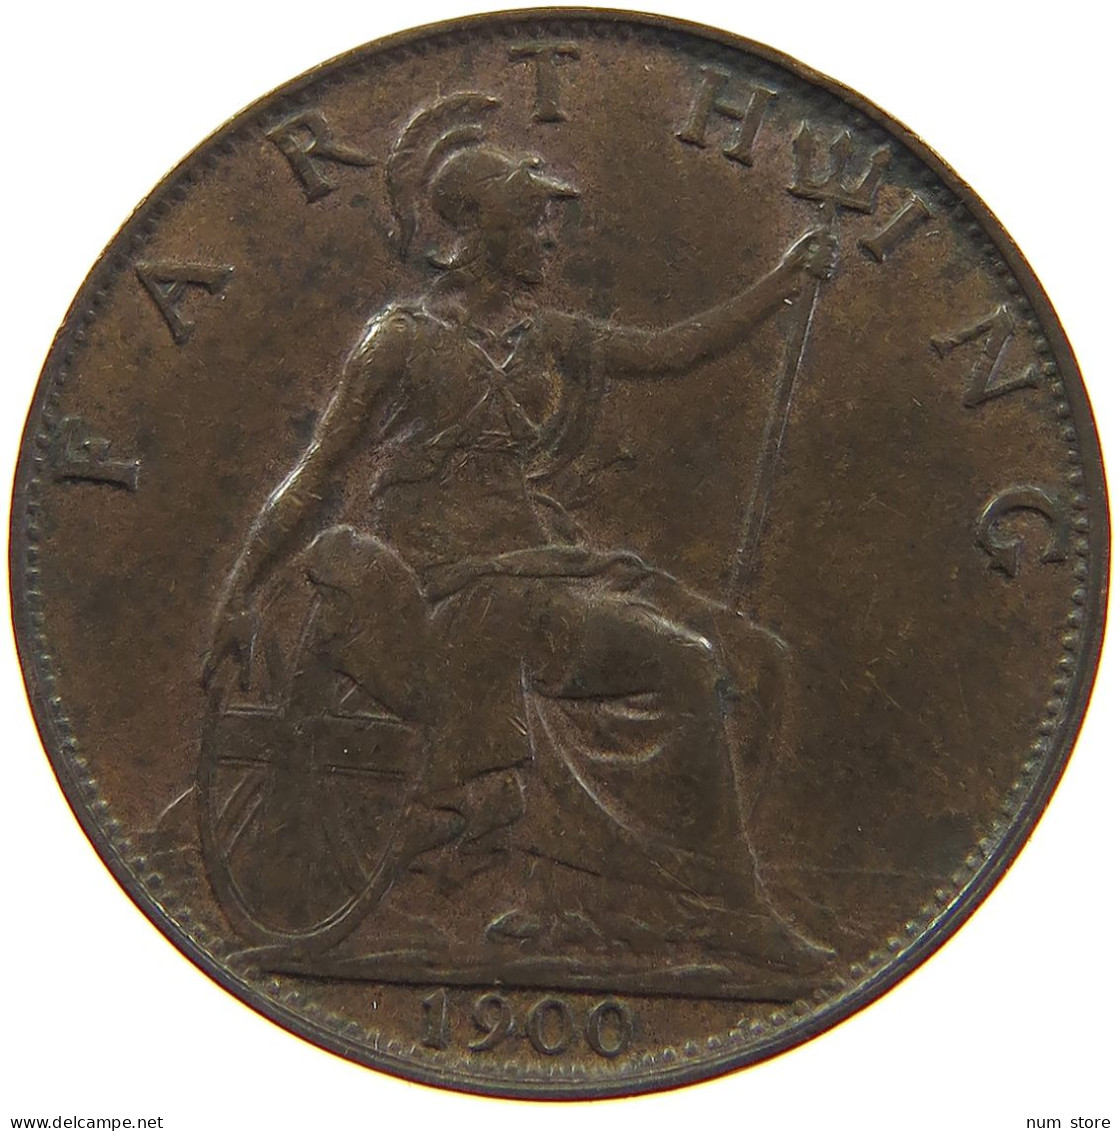 GREAT BRITAIN FARTHING 1900 Victoria 1837-1901 #a011 1003 - B. 1 Farthing